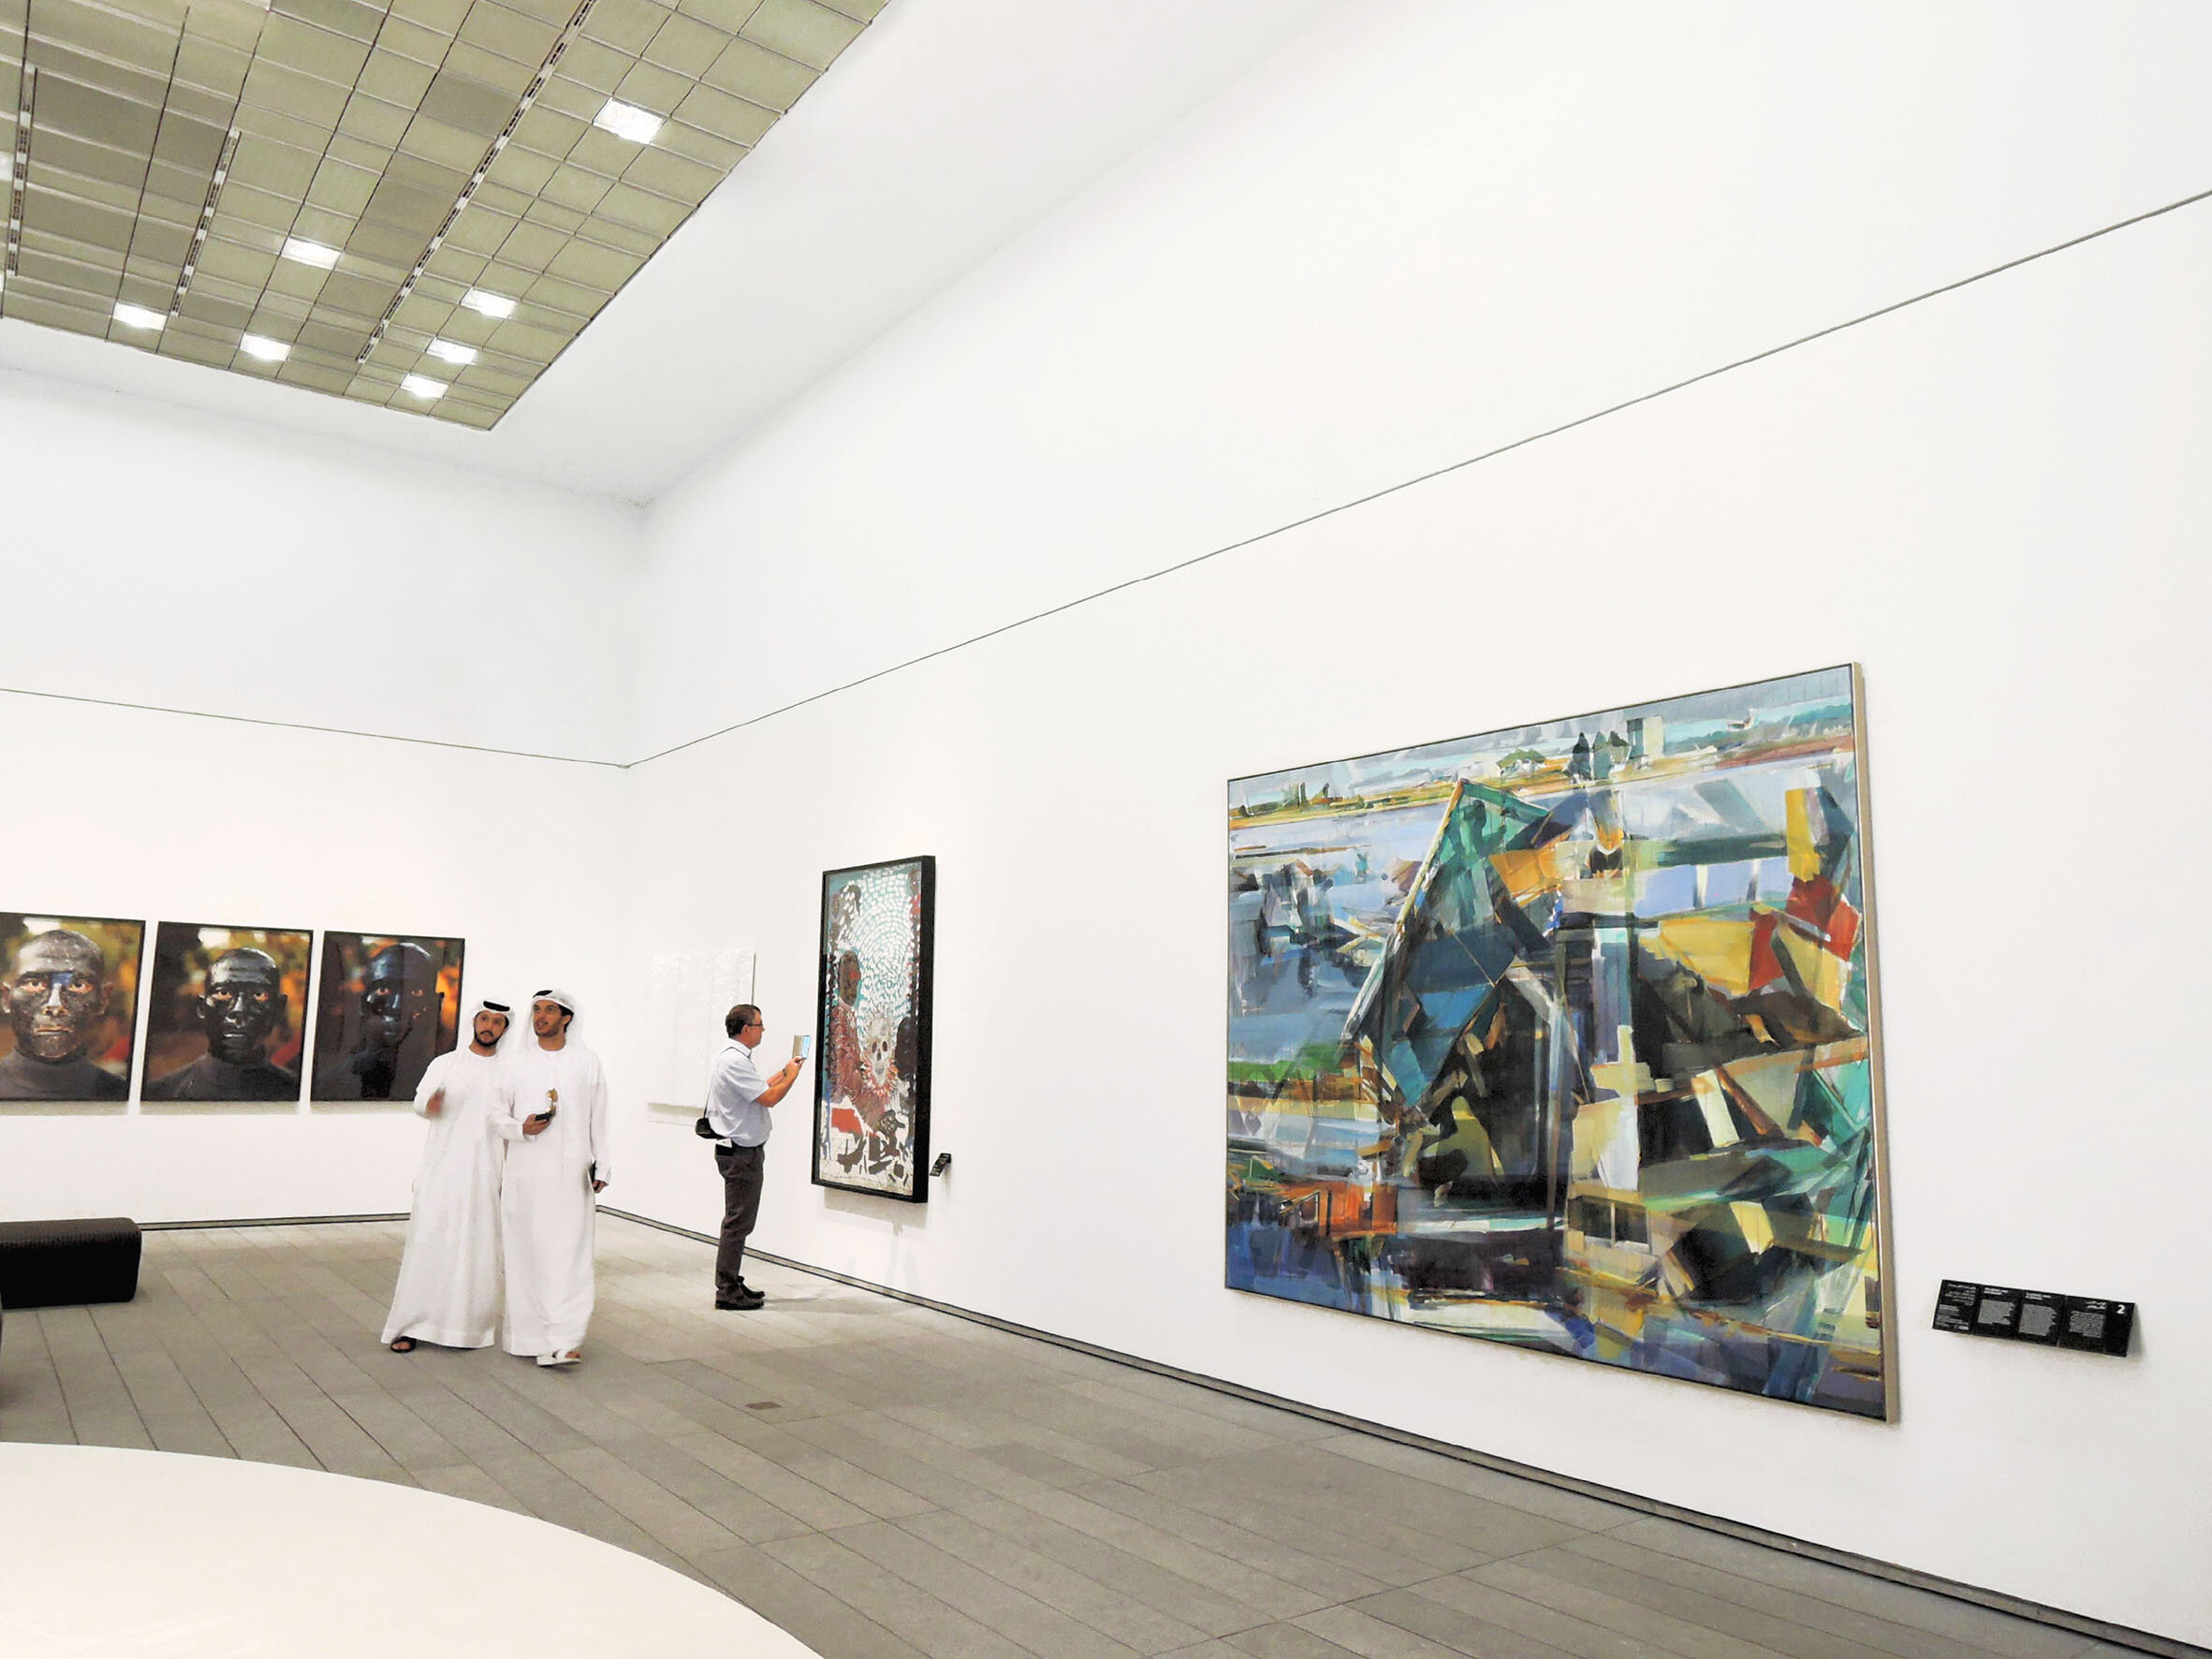 A global stage, exposition inaugurale de la collection contemporaine \ inaugural exhibition of the contemporary collection, Louvre Abu Dhabi, 2017